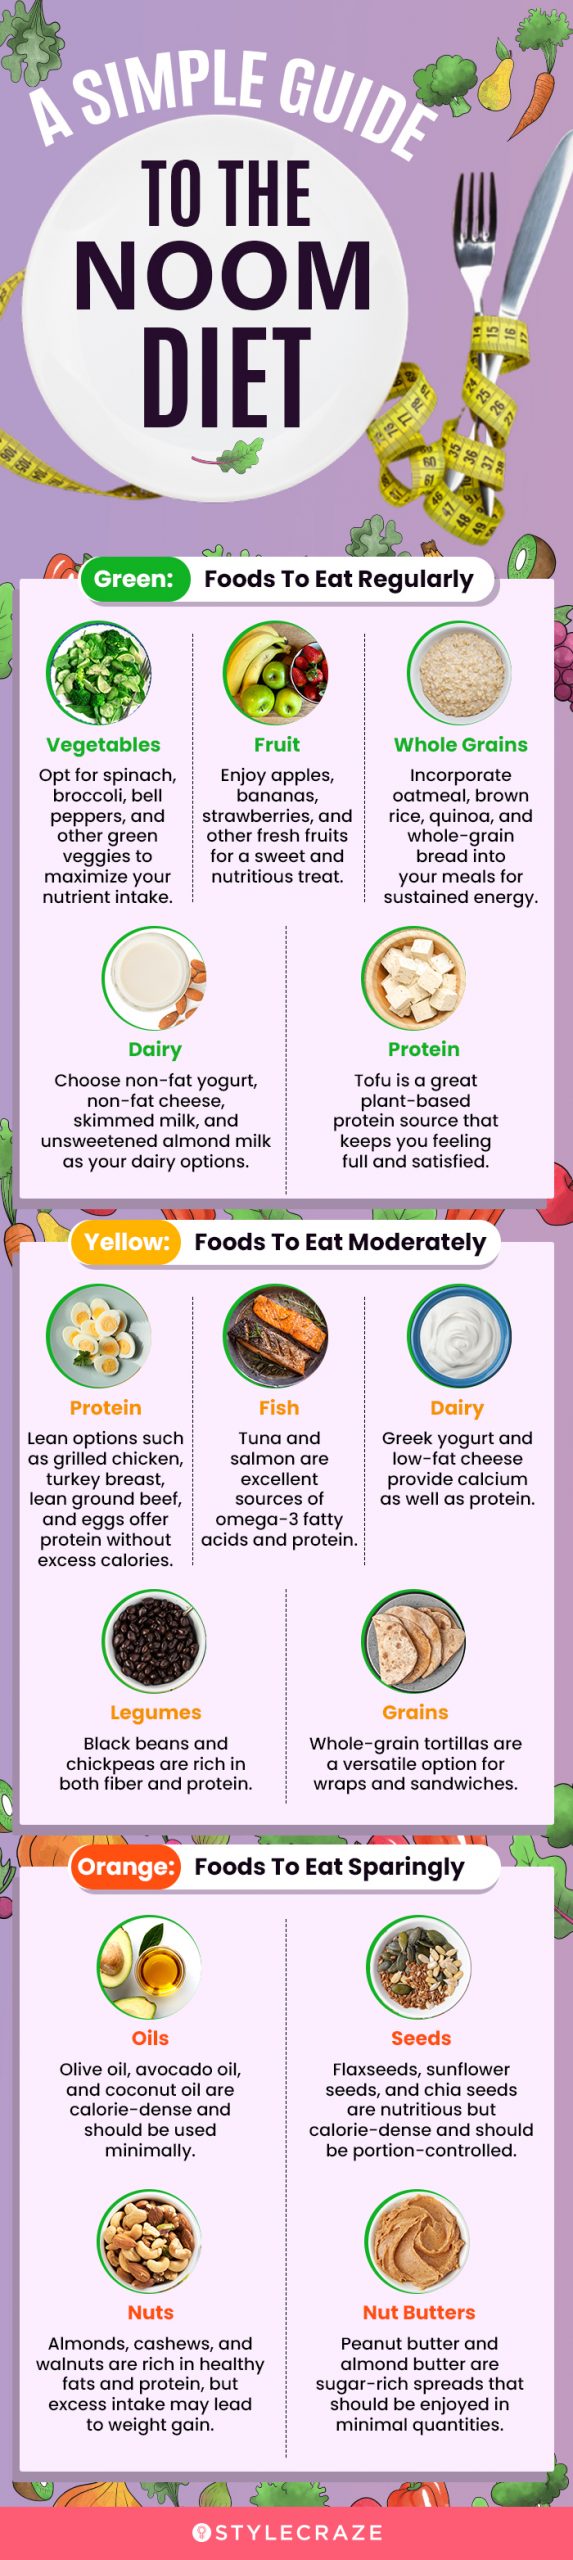 a simple guide to the noom diet (infographic)